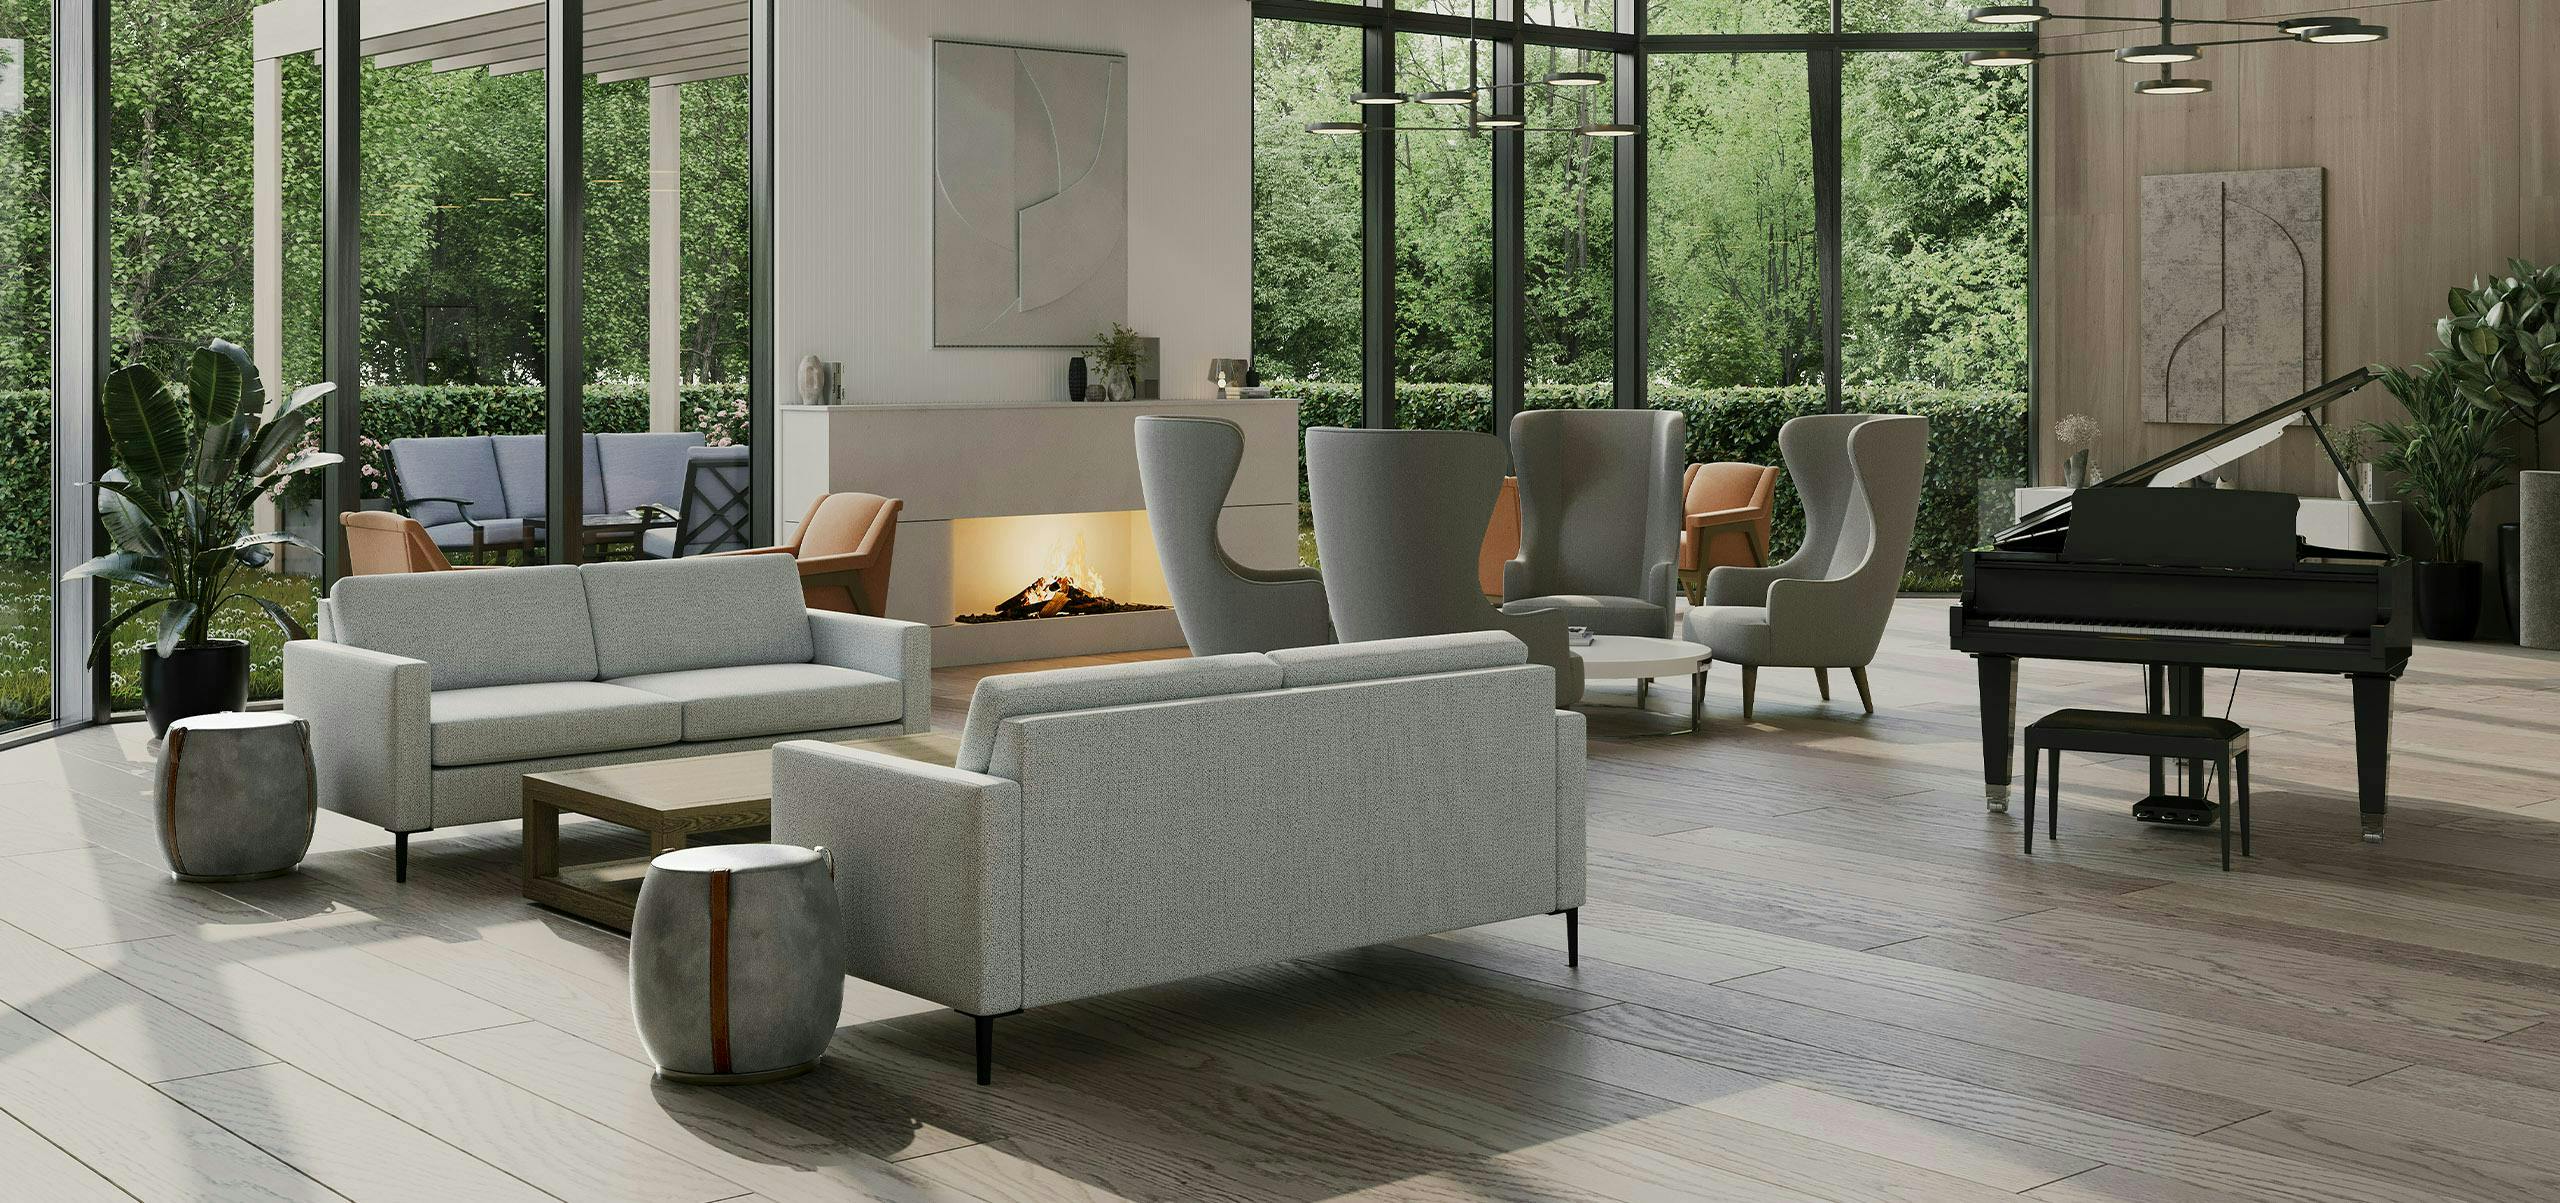 Senior Living Lobby Furniture Featuring Sofas and Lounge Chairs